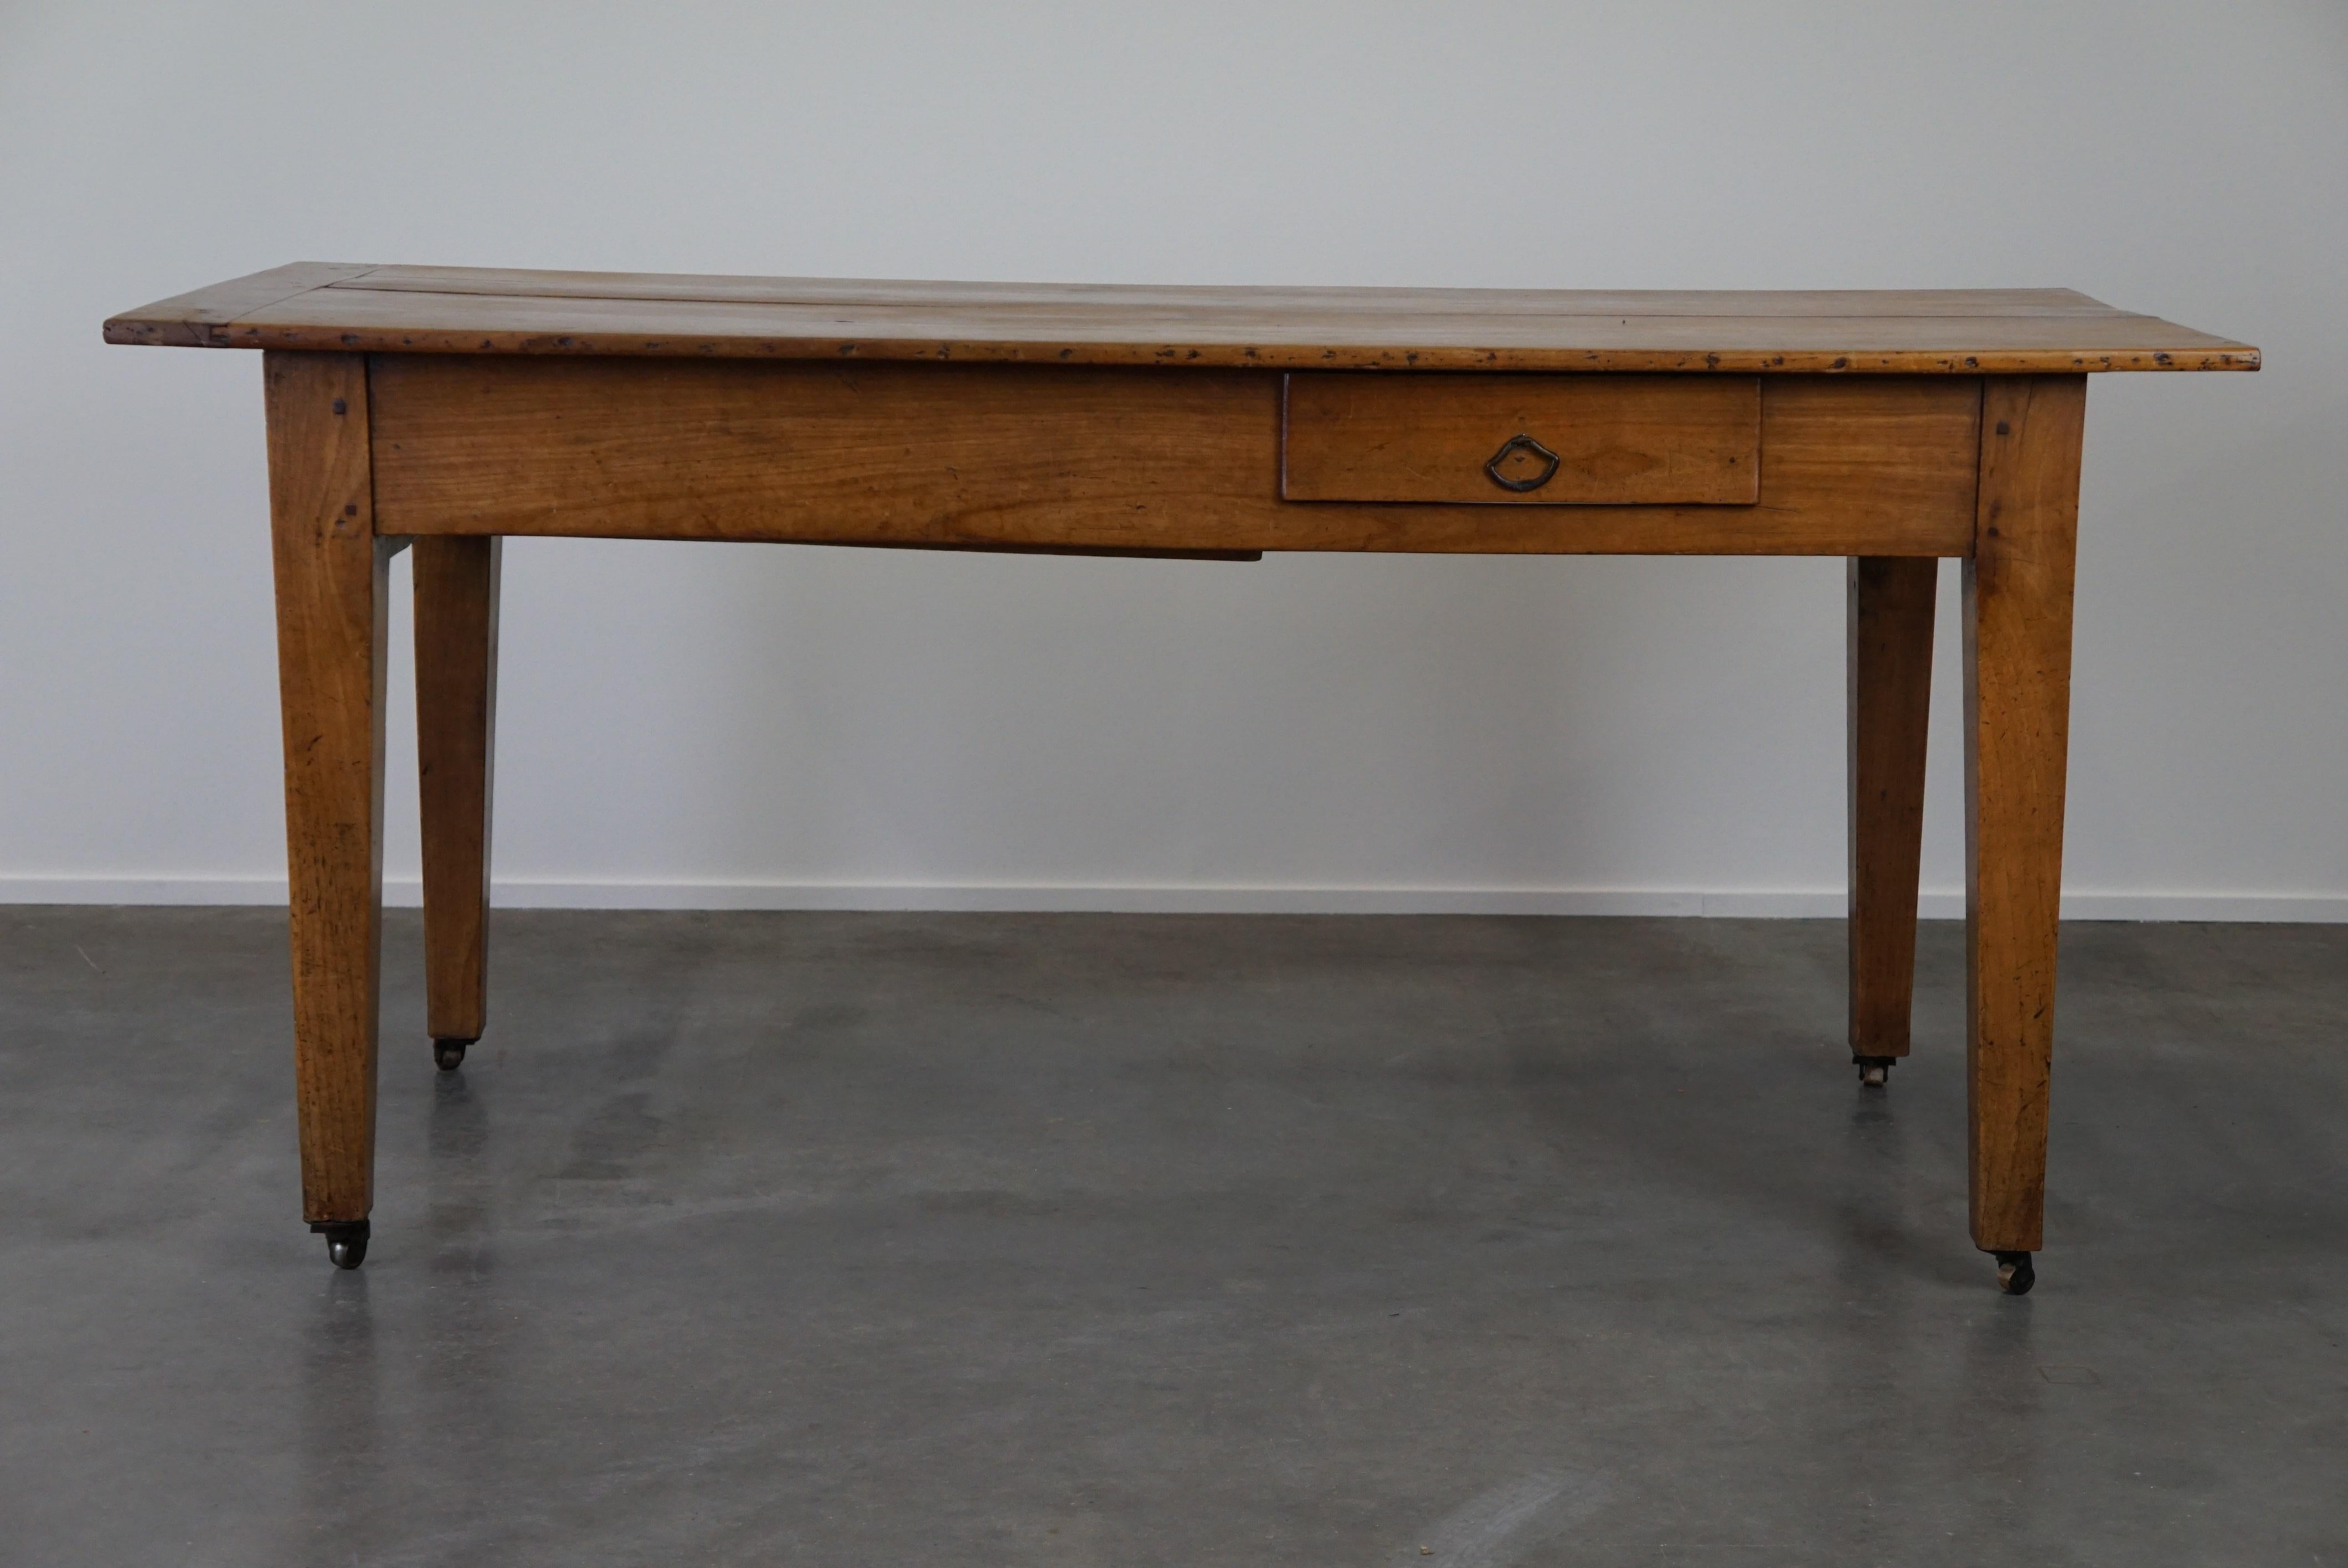 Fruitwood Antique early 19th-century French dining table on casters, made of fruitwood and For Sale